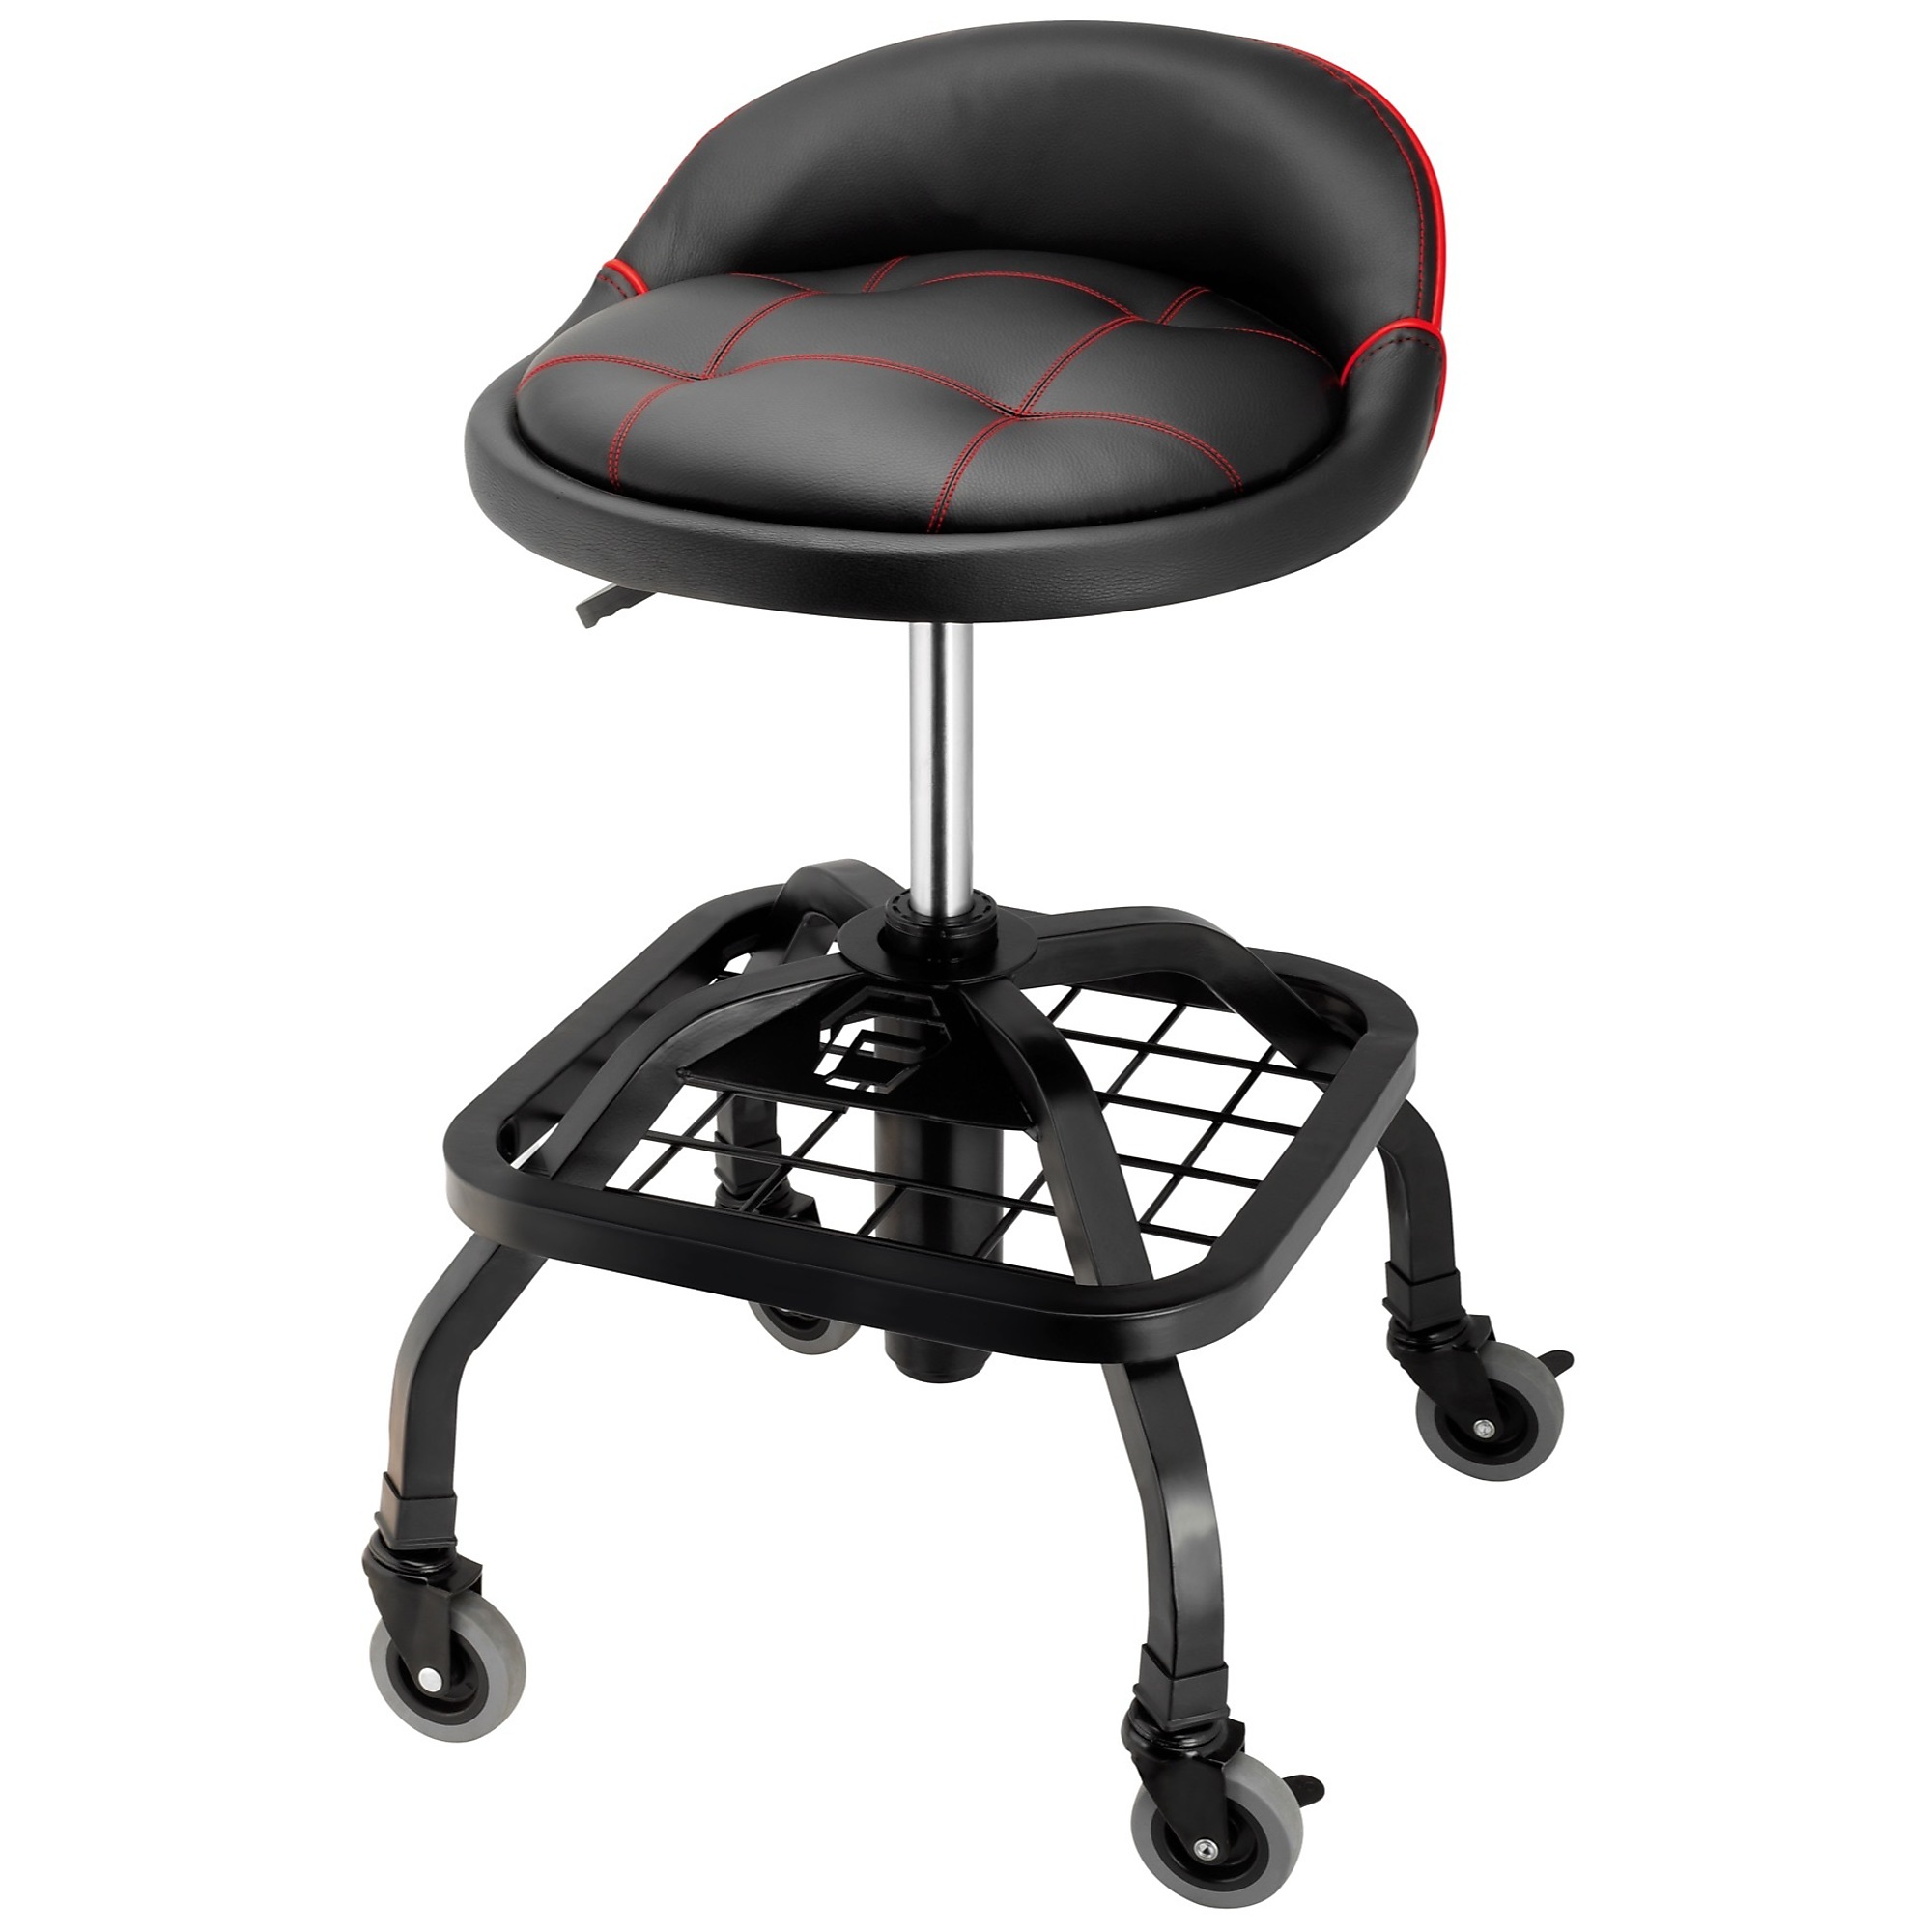 Powerbuilt, Padded Rolling Shop Seat w Lumbar Support, Capacity 330 lb, Max. Height 25 in, MInch Height 19.5 in, Model 240338